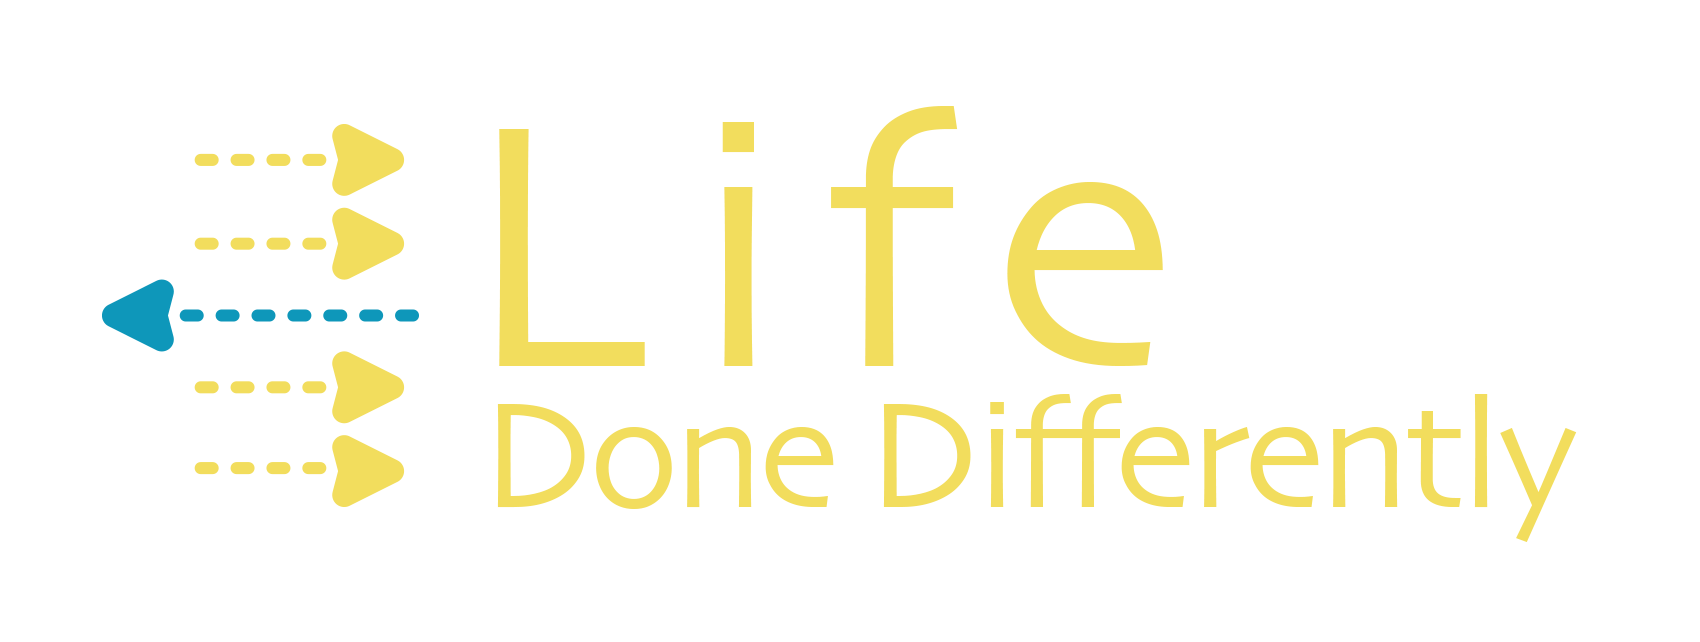 Life Done Differently